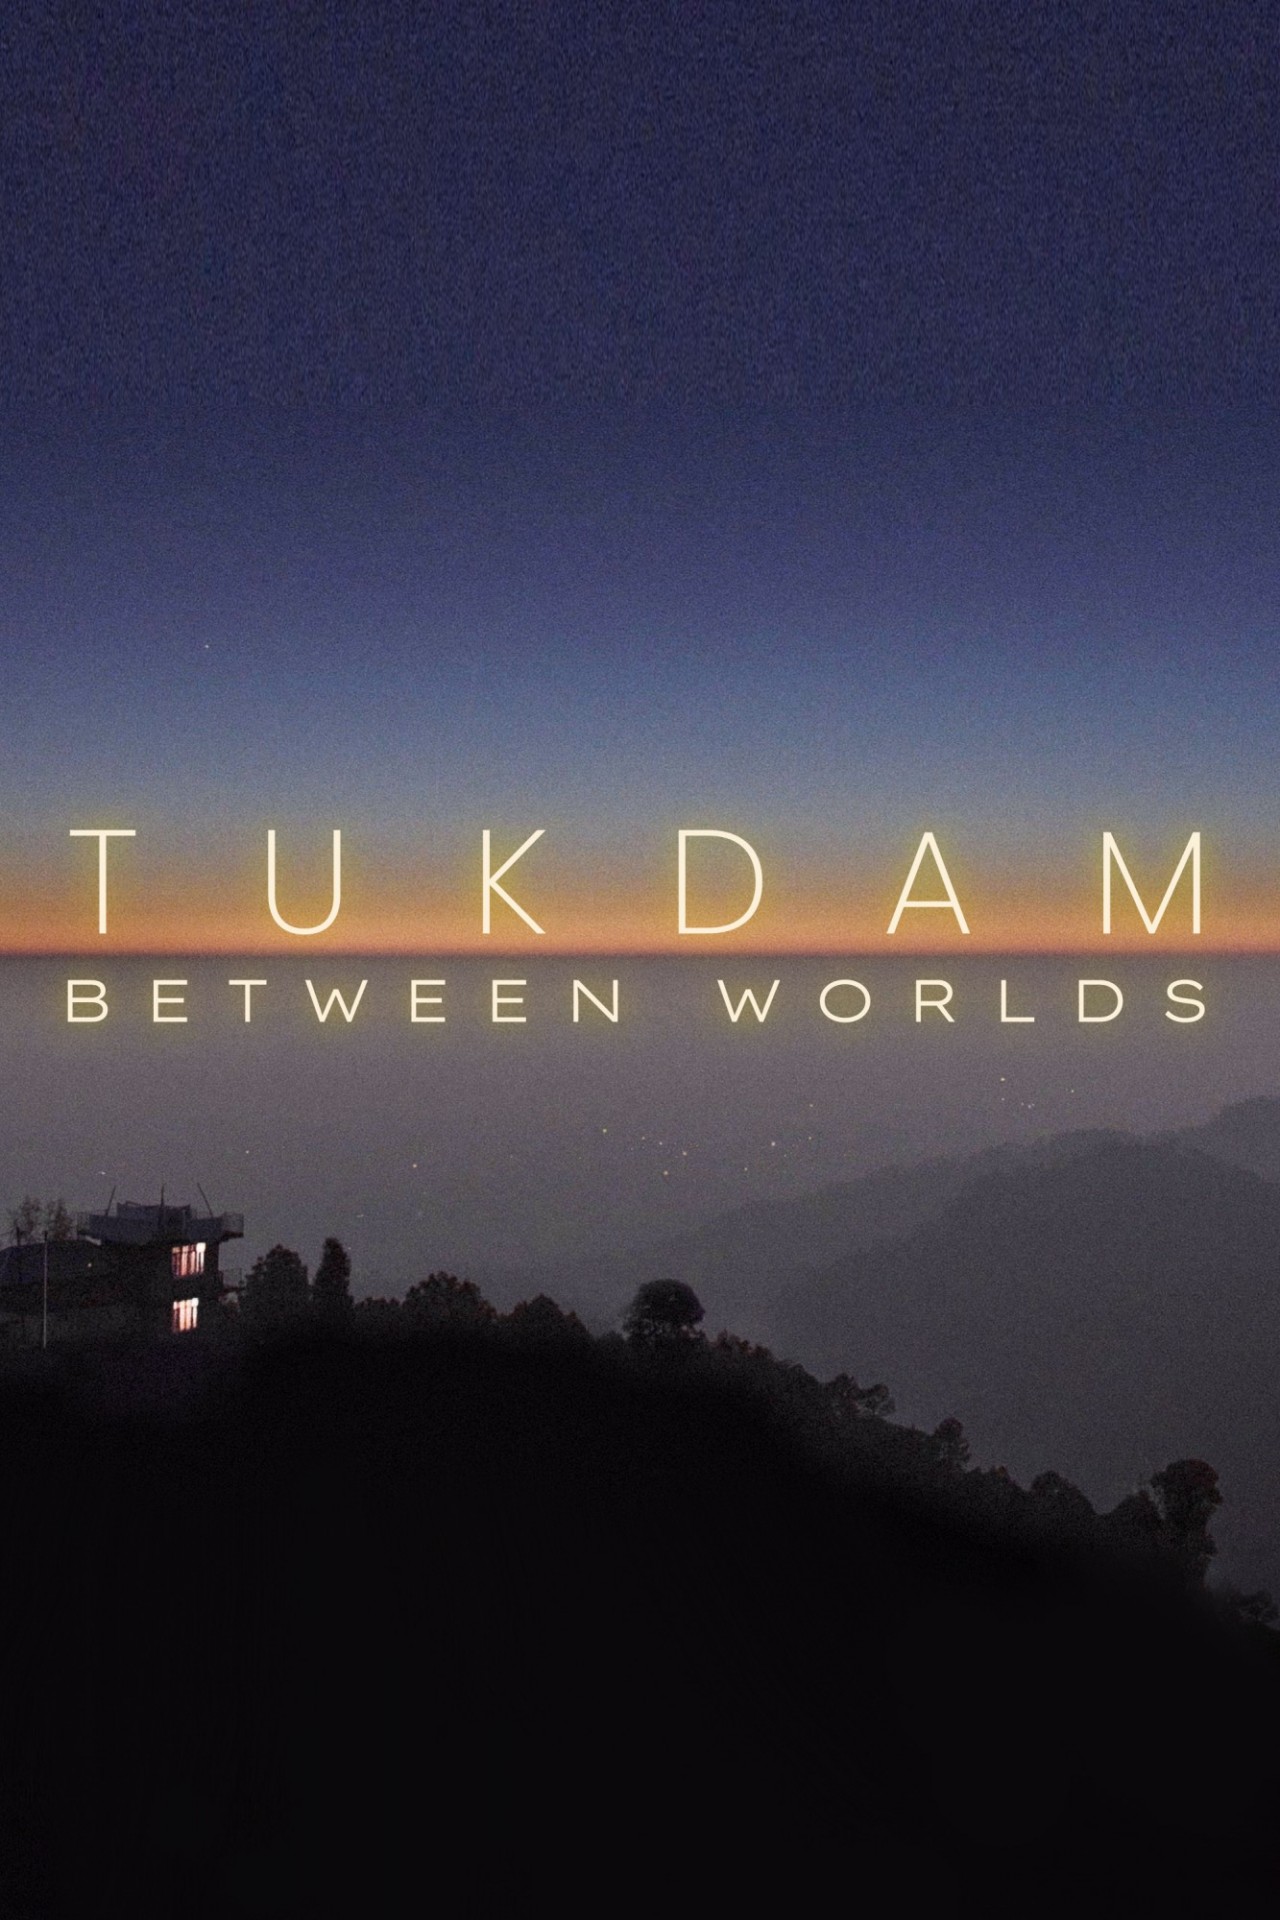 Poster for Tukdam documentary film. image of horizon with text that reads: Tukdam: Between Worlds.